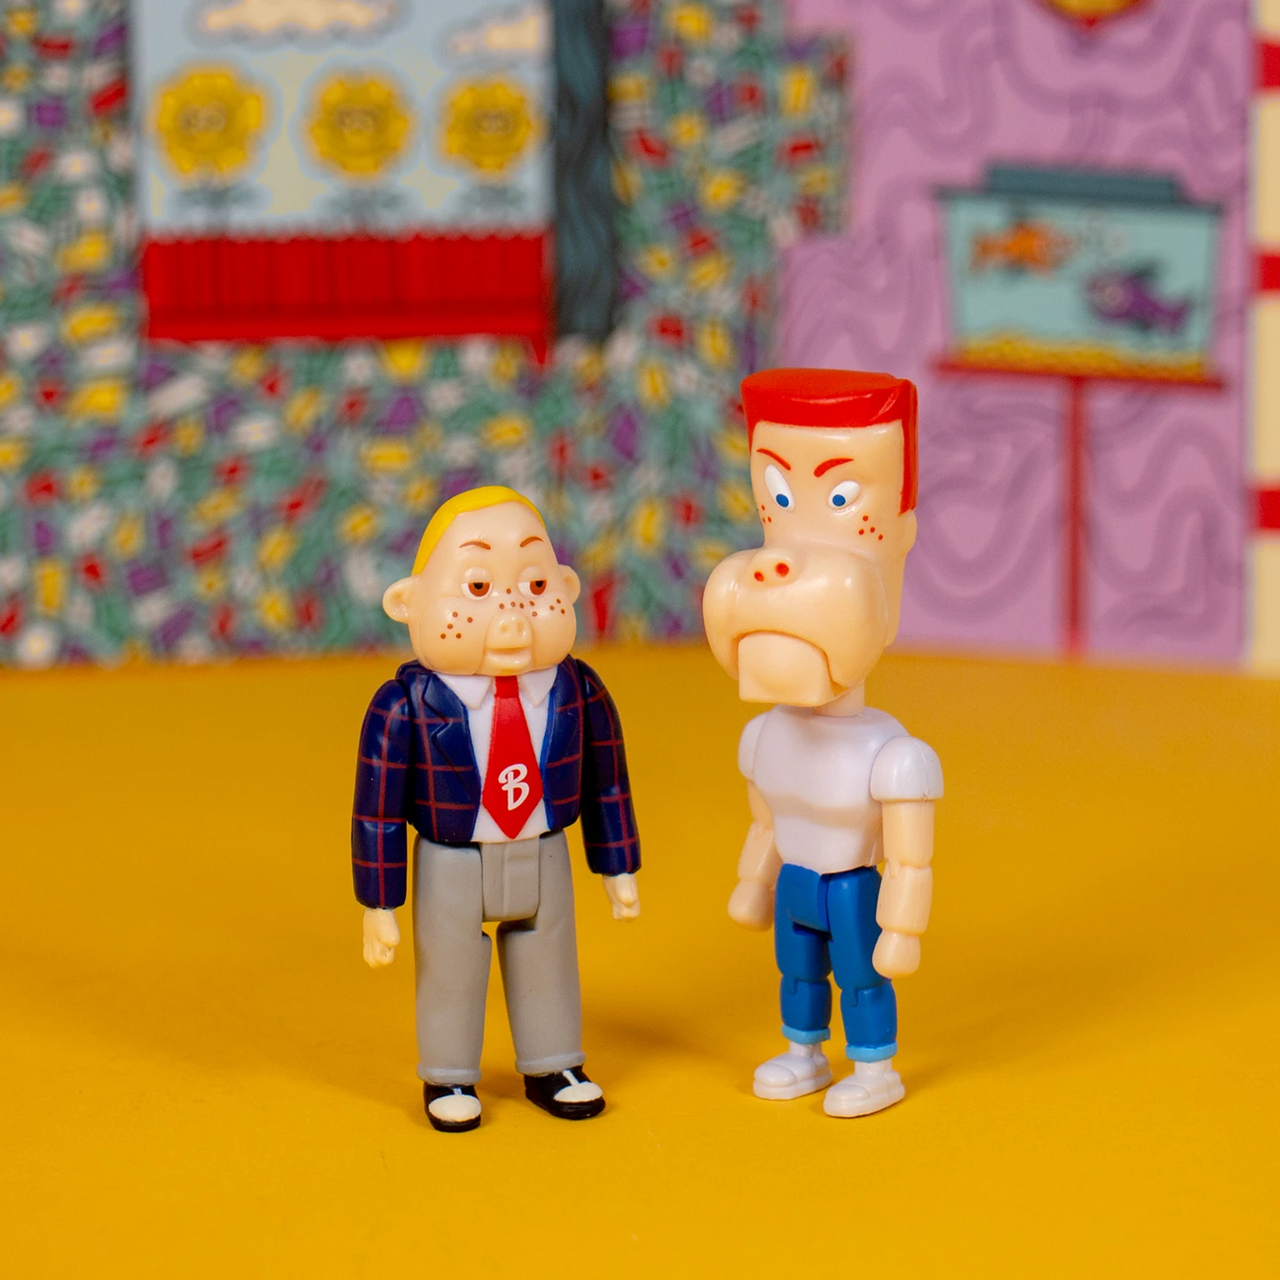 REACTION: PEE-WEE'S PLAYHOUSE RANDY & BILLY BALONEY FIGURES